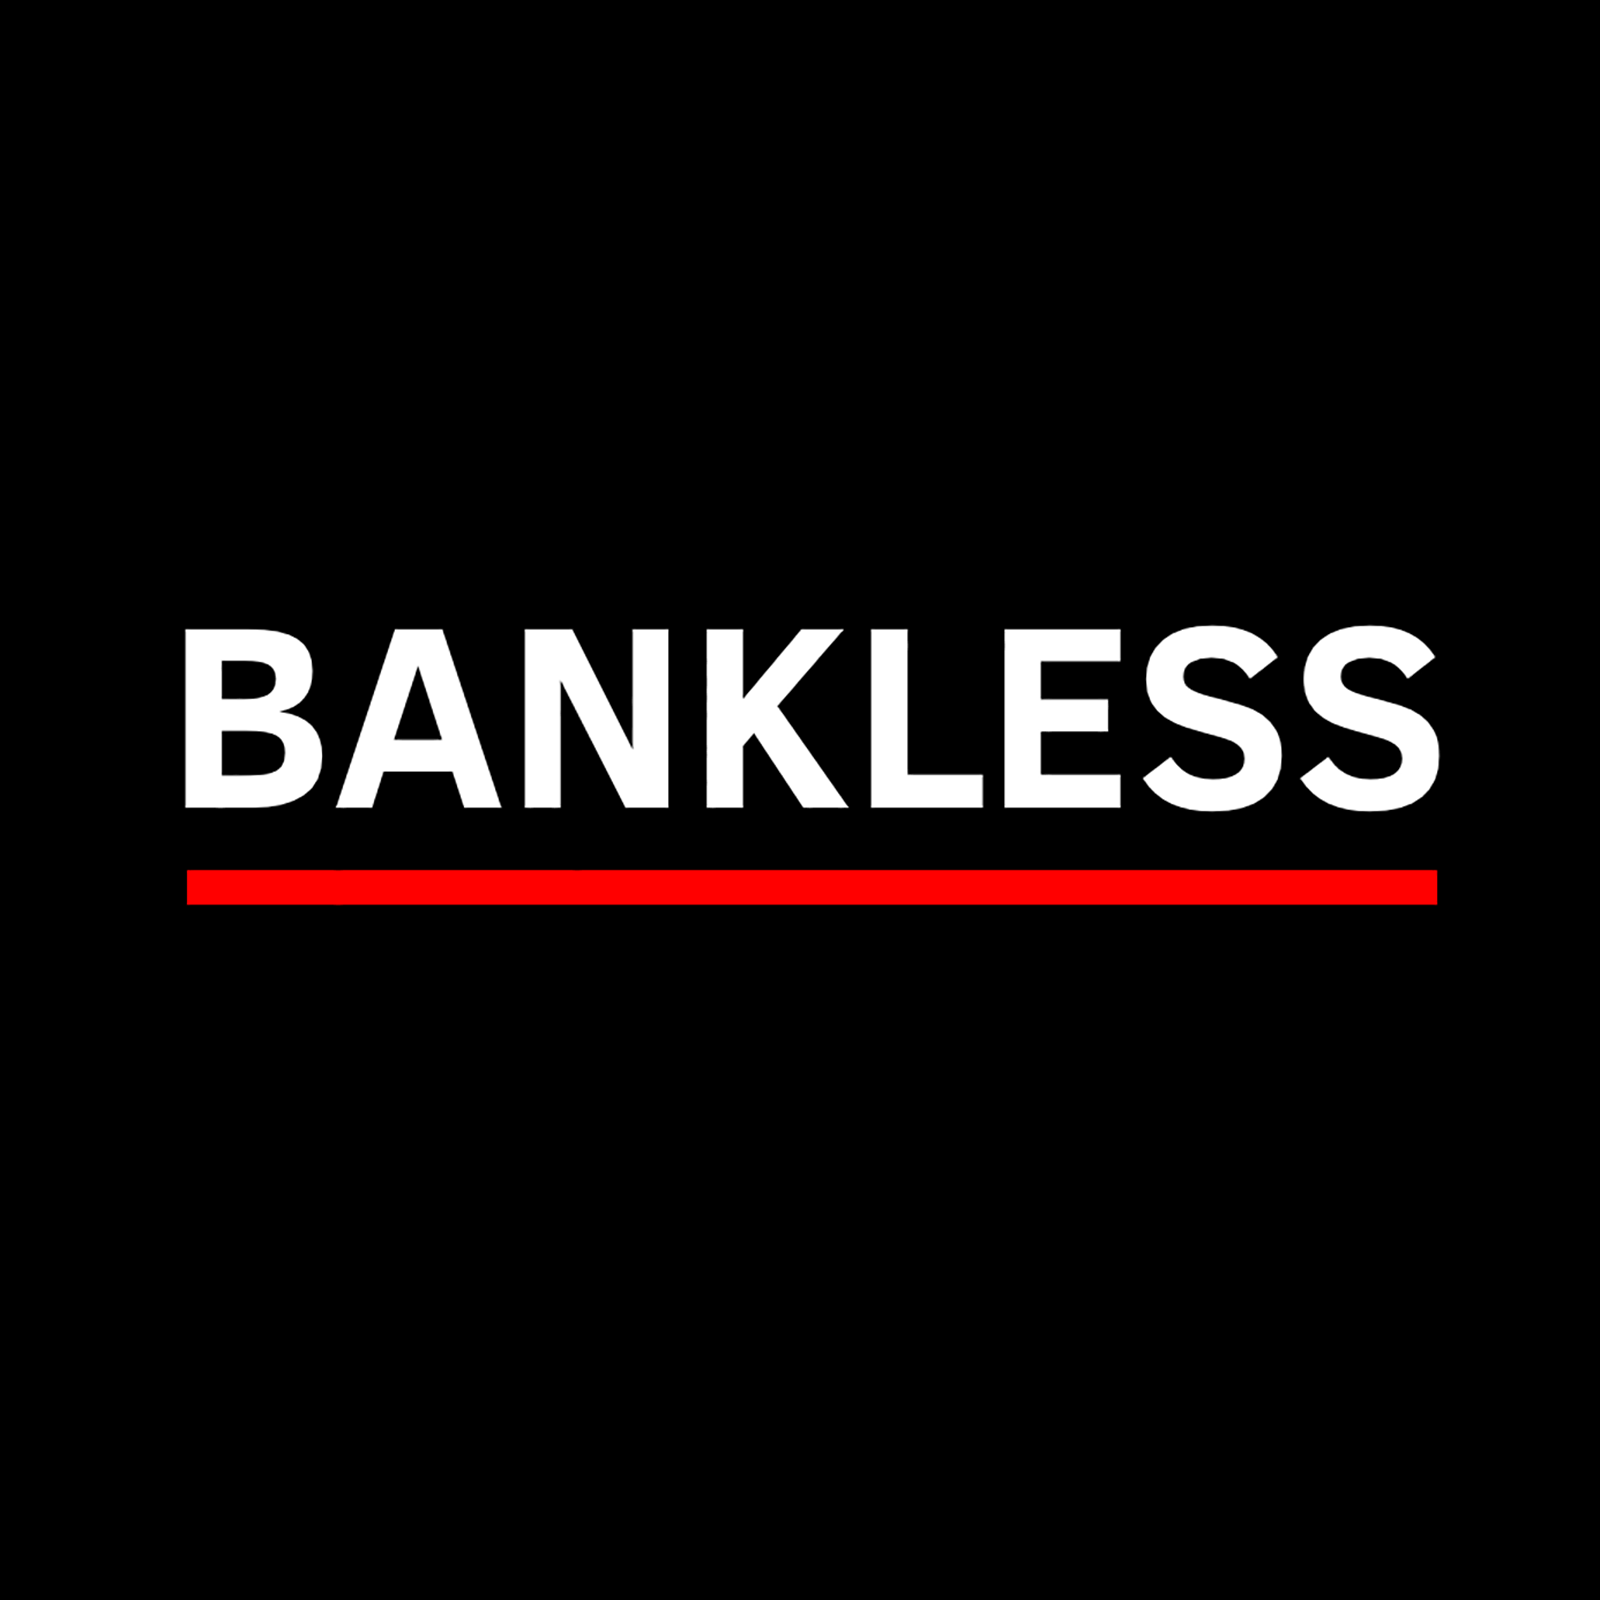 Fresh update on "first week" discussed on Bankless